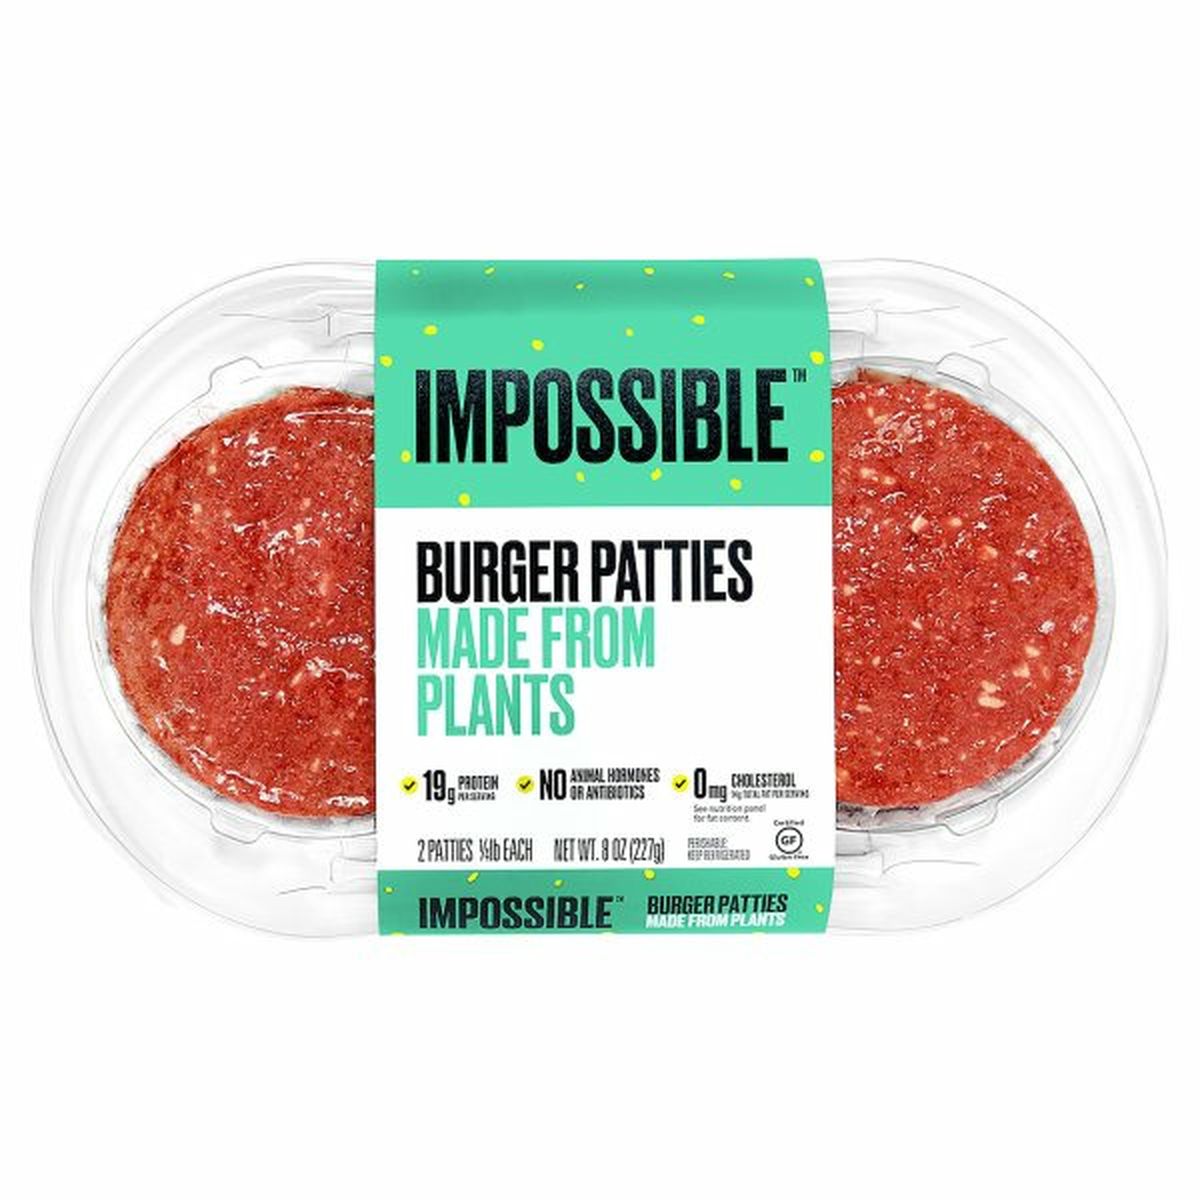 Calories in Impossible Burger Patties